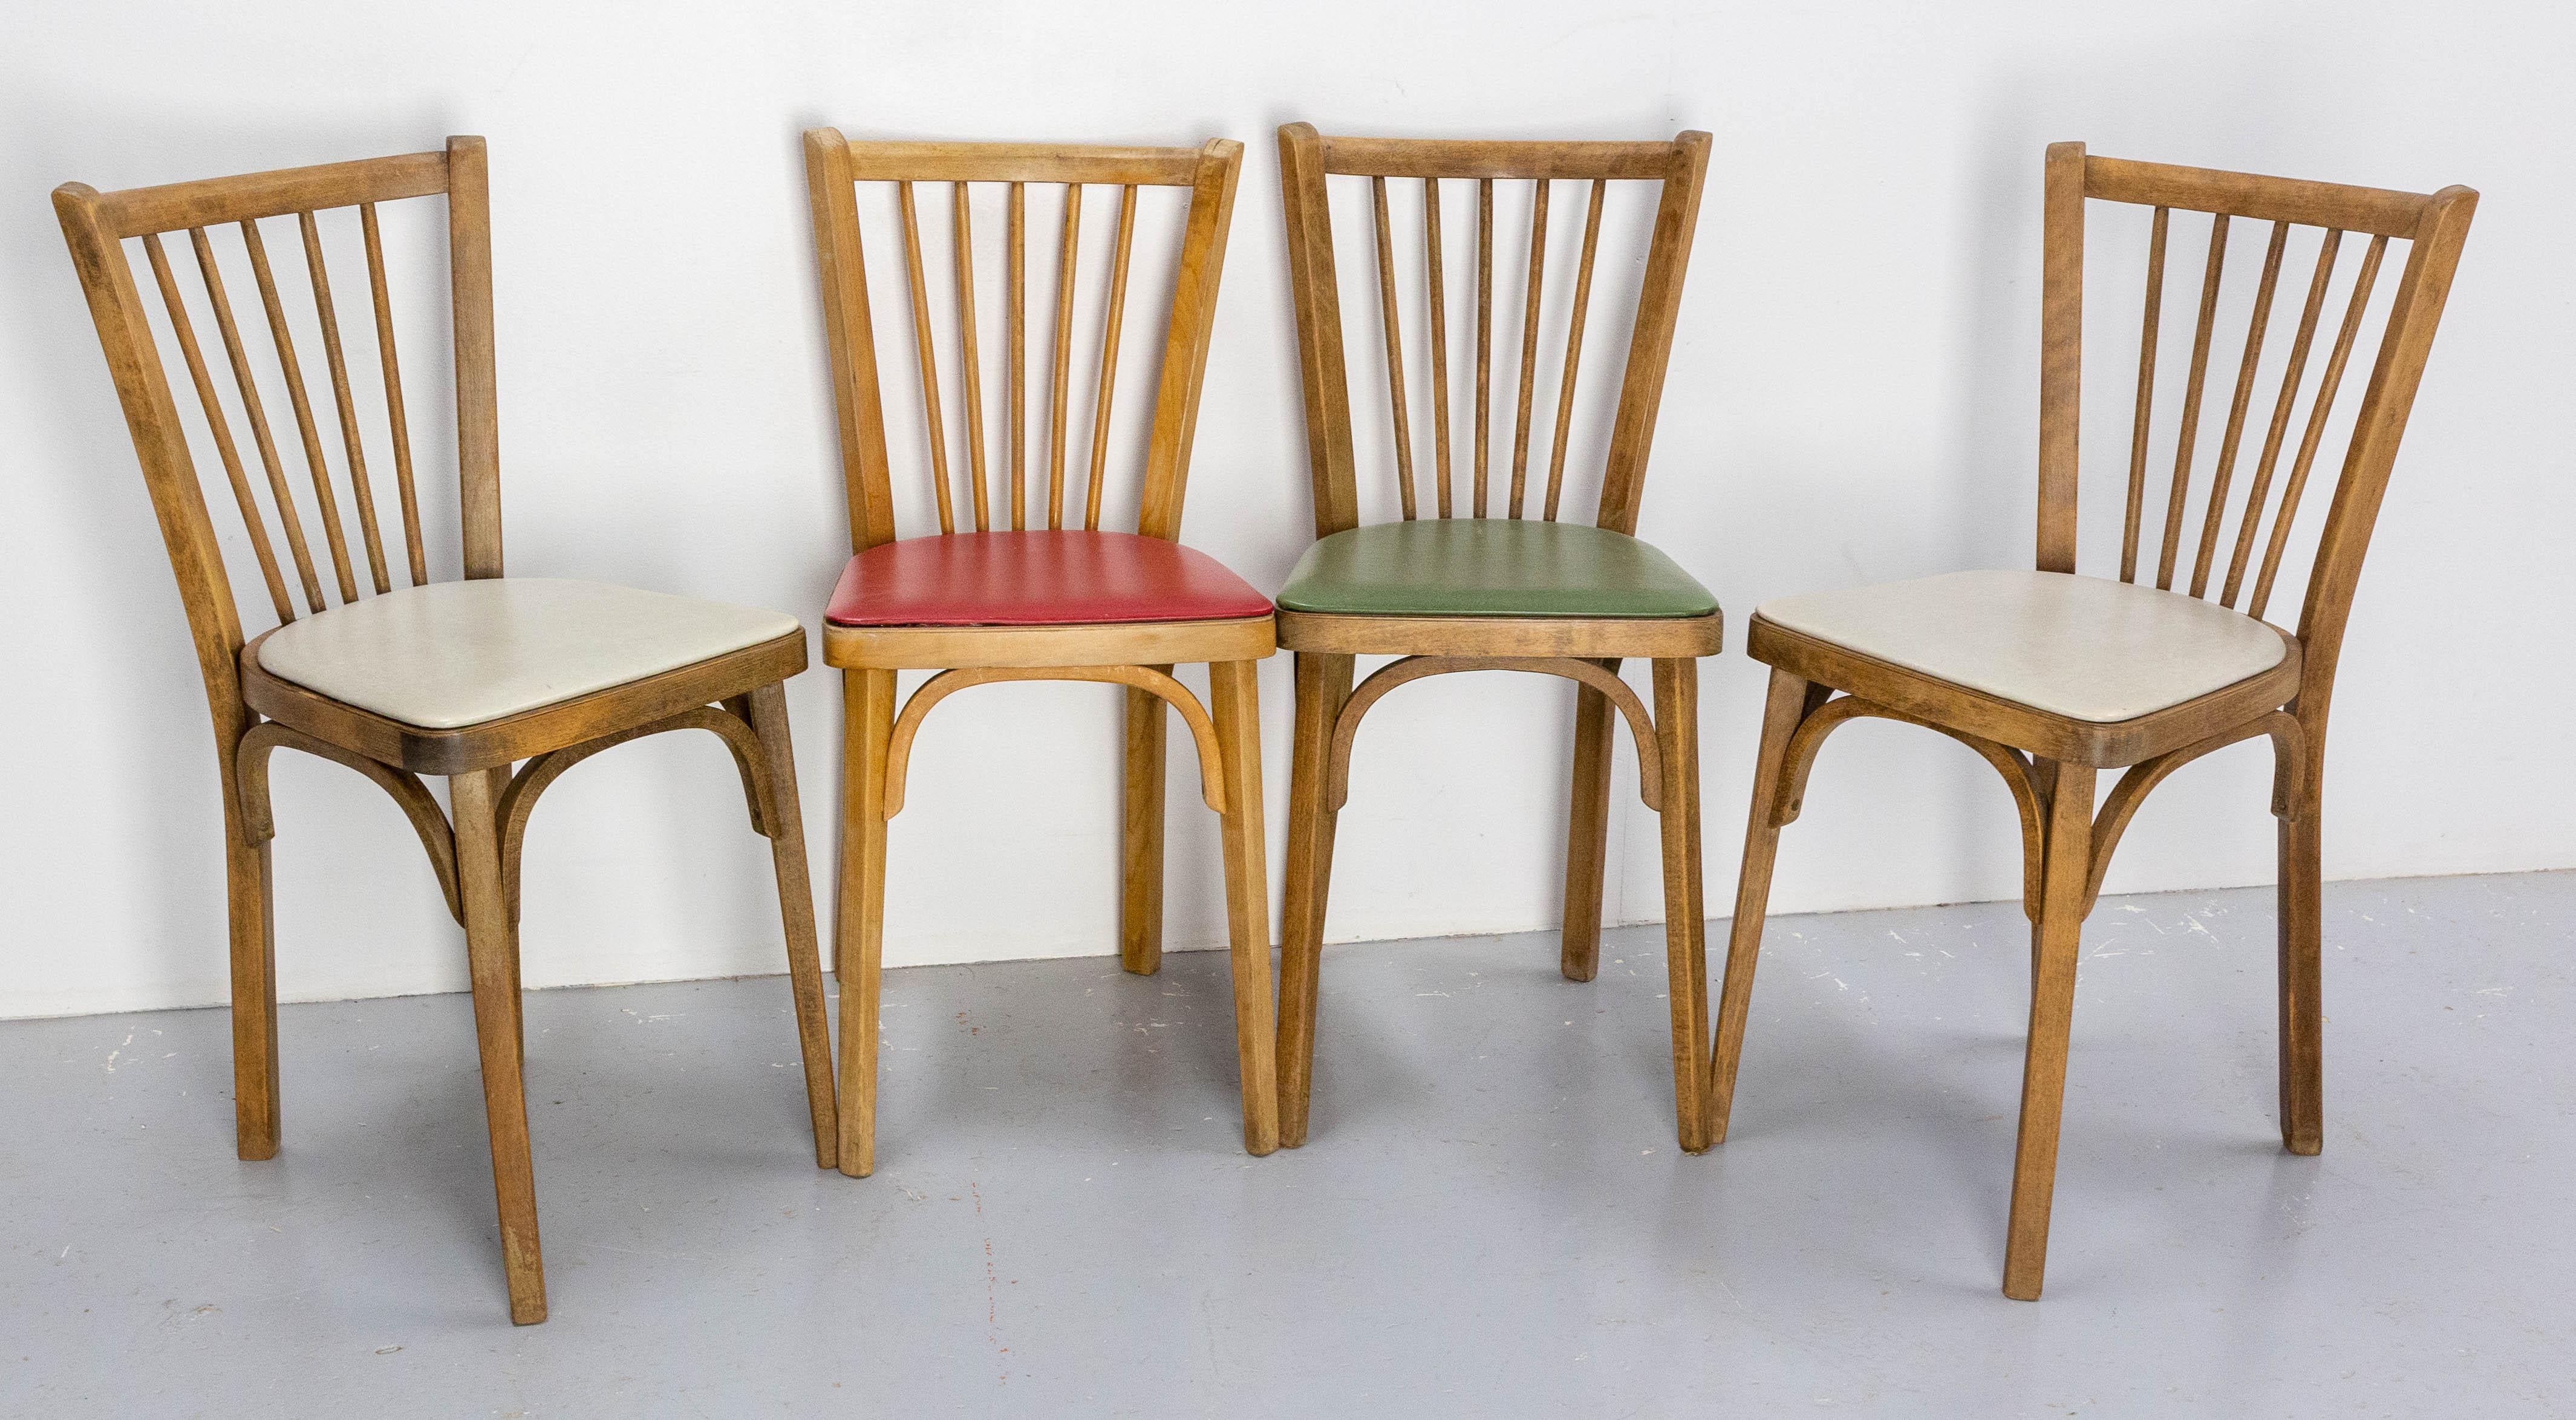 Four Bistro Dining Chairs Baumann Beech and Skai France Midcentury, circa 1950 For Sale 5